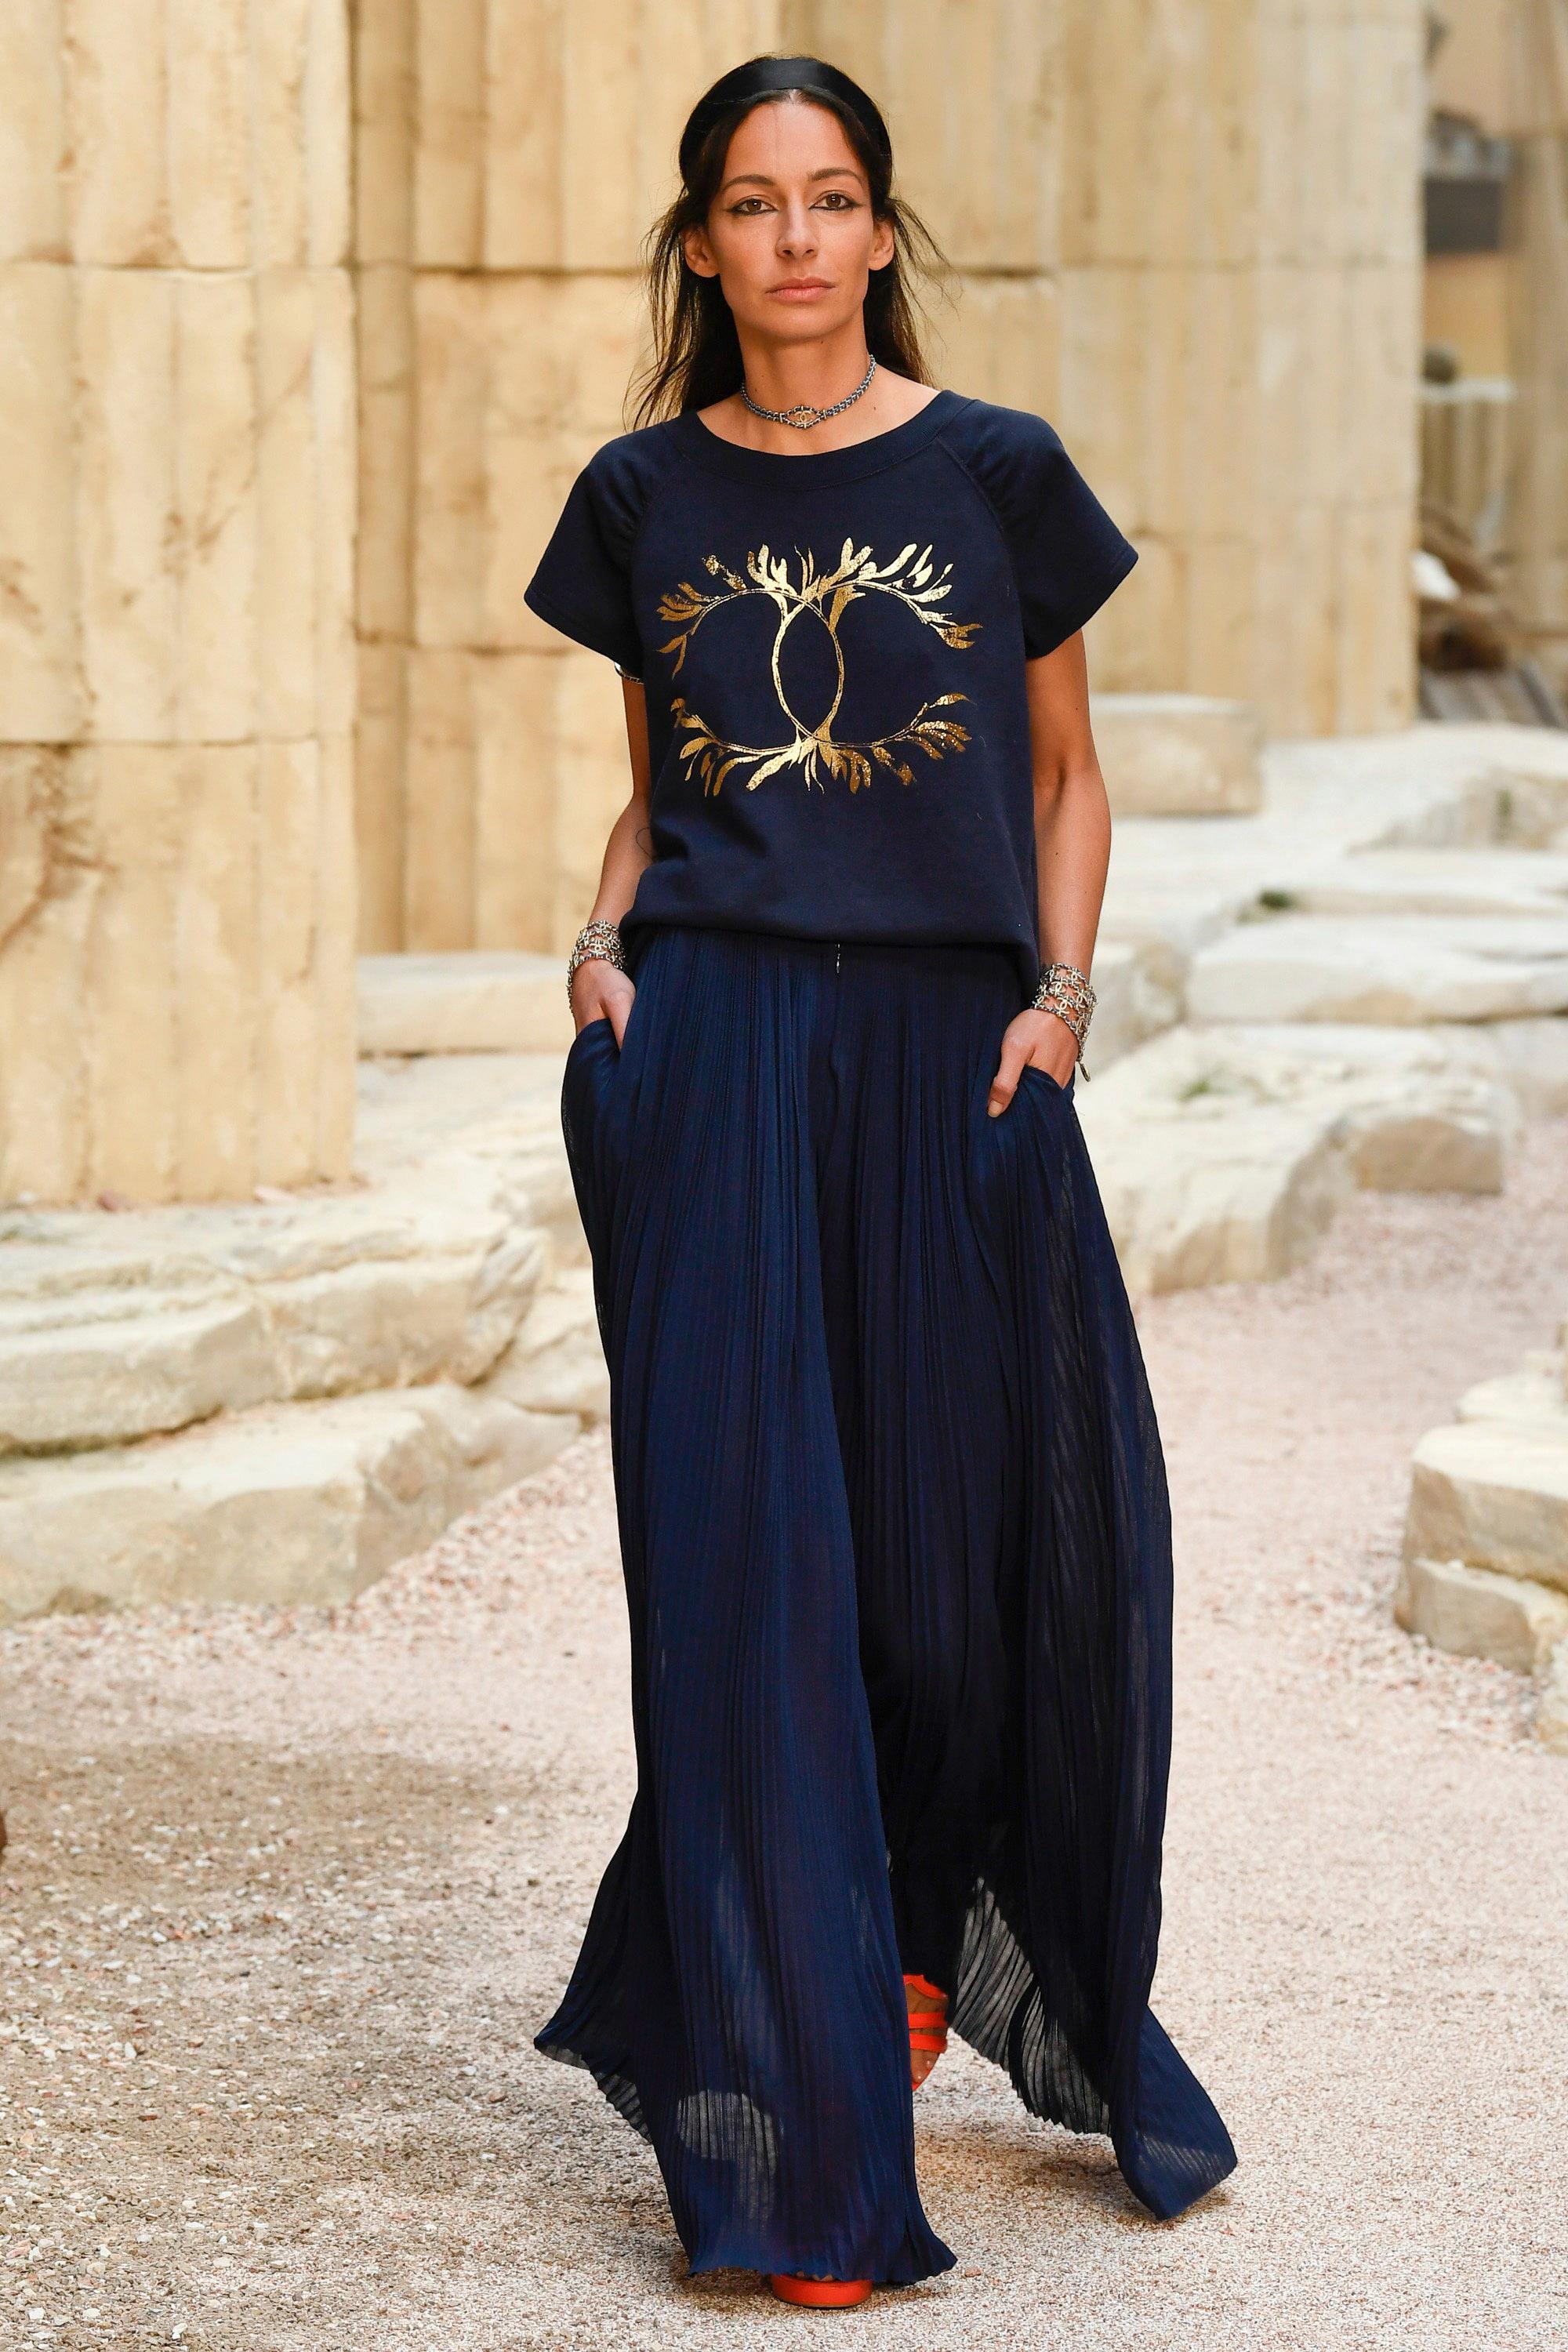 These stunning, flowy navy blue palazzo pants are part of the Chanel Cruise 2018 Greece collection, known for its meticulous attention to detail. Made from semi-sheer jersey silk fabric, the pants offer a luxurious and lightweight feel. The navy